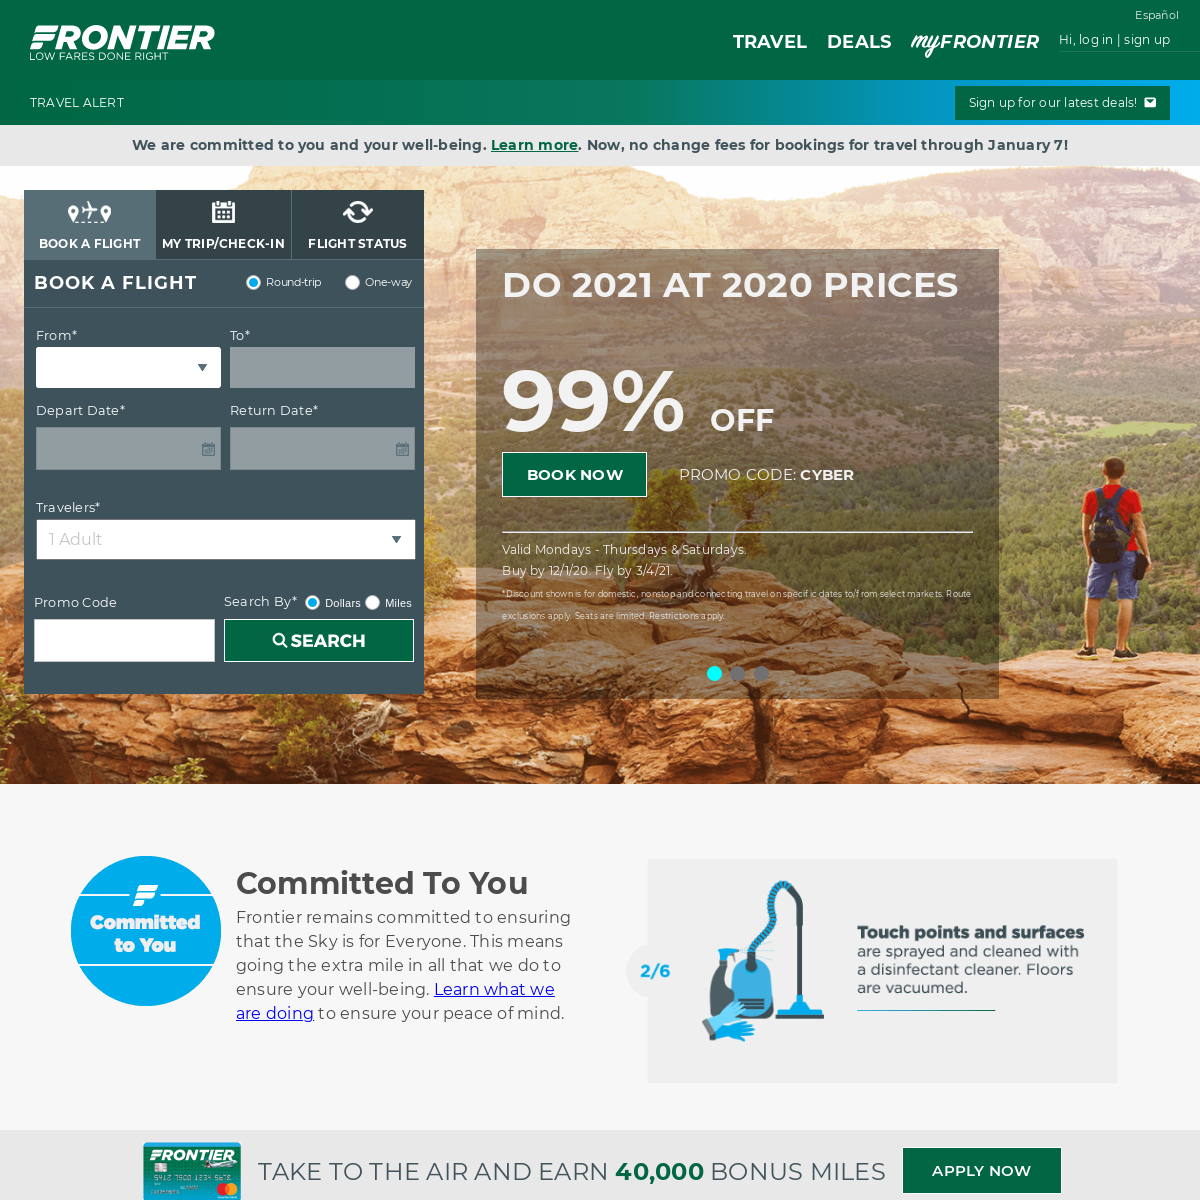 A complete backup of frontierairlines.com